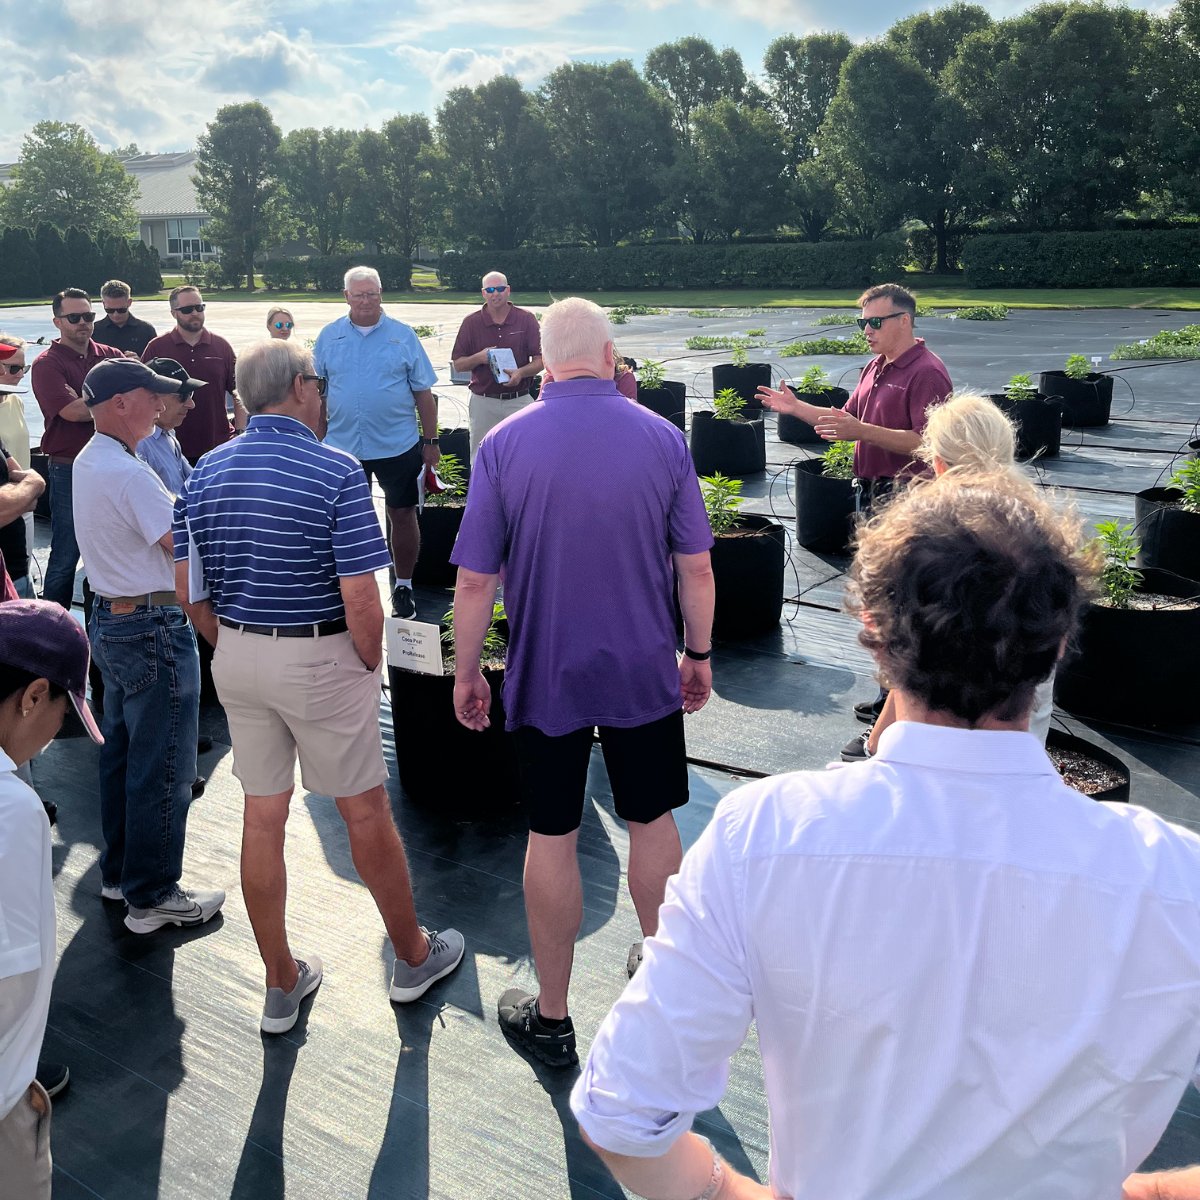 #FBF to our R&D Field Day last month, the perfect opportunity for our scientists and horticulturalists to show off all of their progress from the past year and plan out what they’ll focus on for the next year! #Hawthorne360 #ResearchAndDevelopment